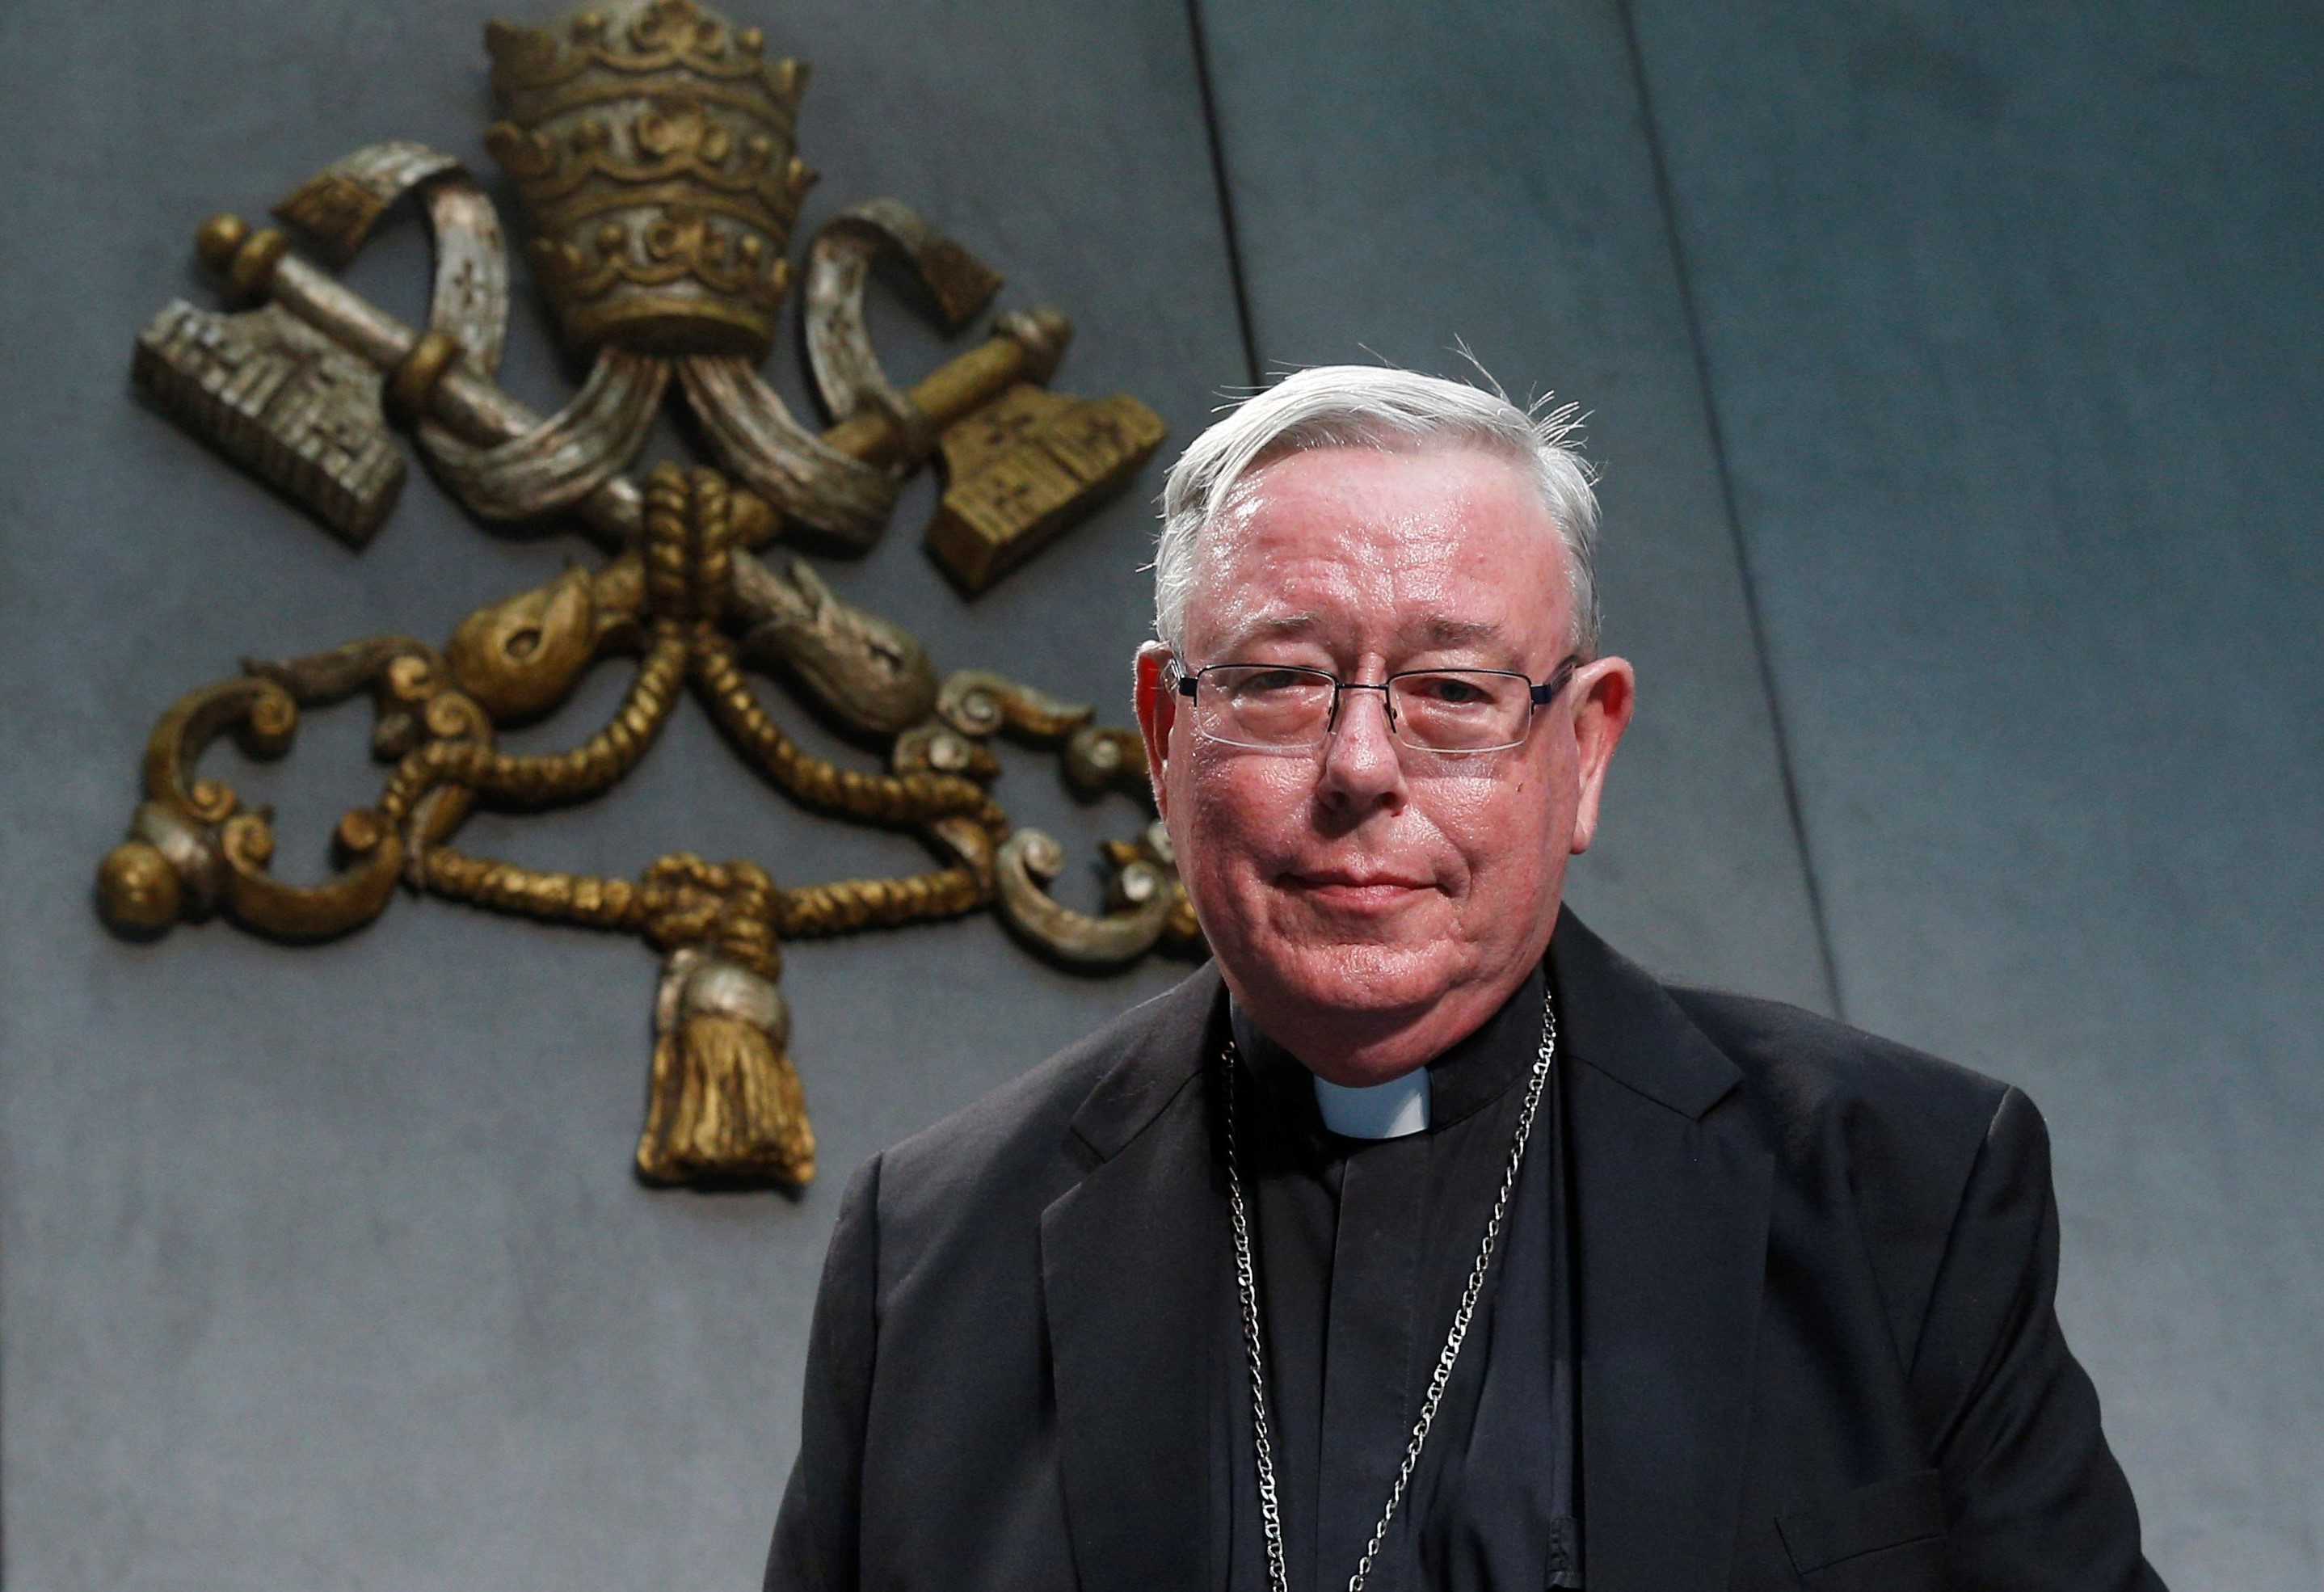 Cardinal Jean-Claude Hollerich of Luxembourg, relator general of the Synod of Bishops, arrives for a news conference to present an update on the synod process at the Vatican Aug. 26. (CNS/Paul Haring)